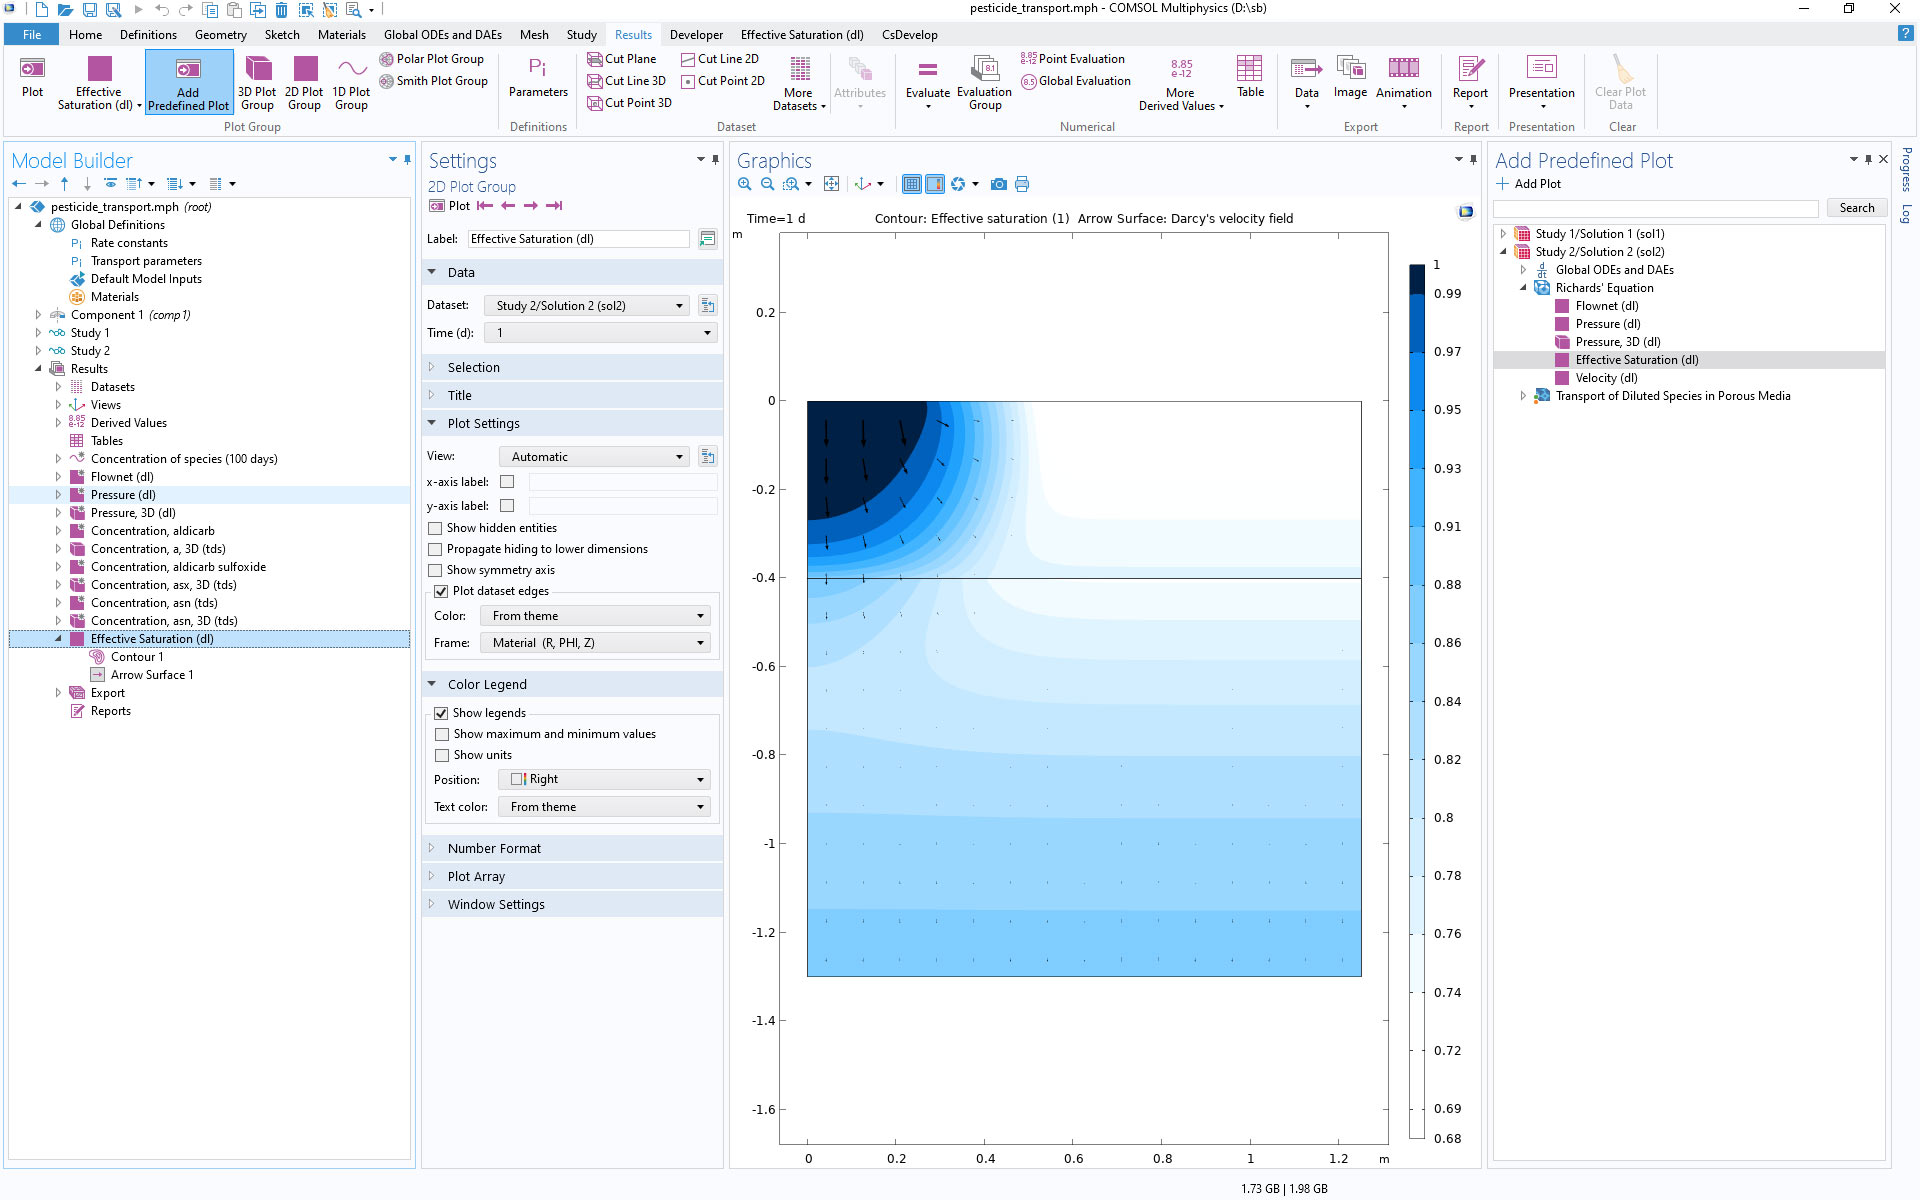 The COMSOL Multiphysics UI showing the Model Builder window with the Effective Saturation plot selected, the 2D Plot Group Settings window, the Graphics window, and the Add Predefined Plot window.